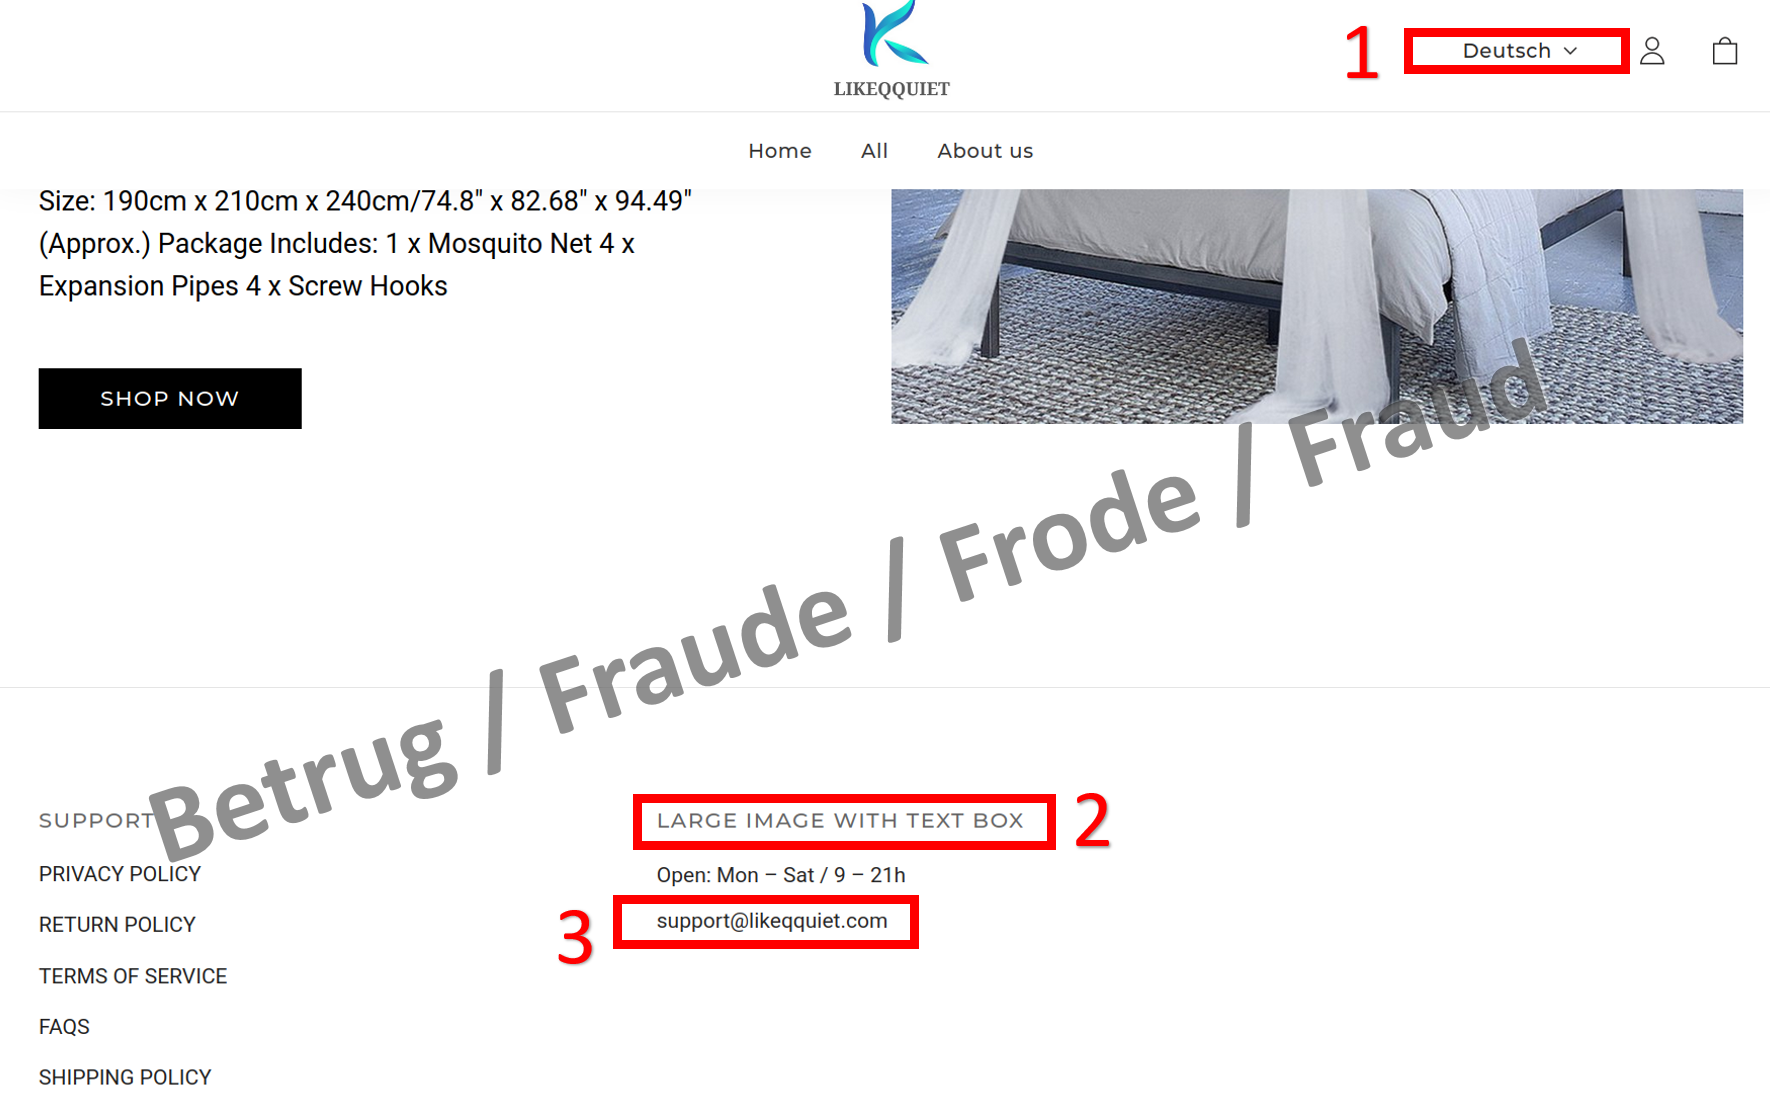 Website of a fraudulent webshop. The only contact information is an email address (3), although German was chosen as the language, the page is in English (1) and there is placeholder text instead of a picture (2).